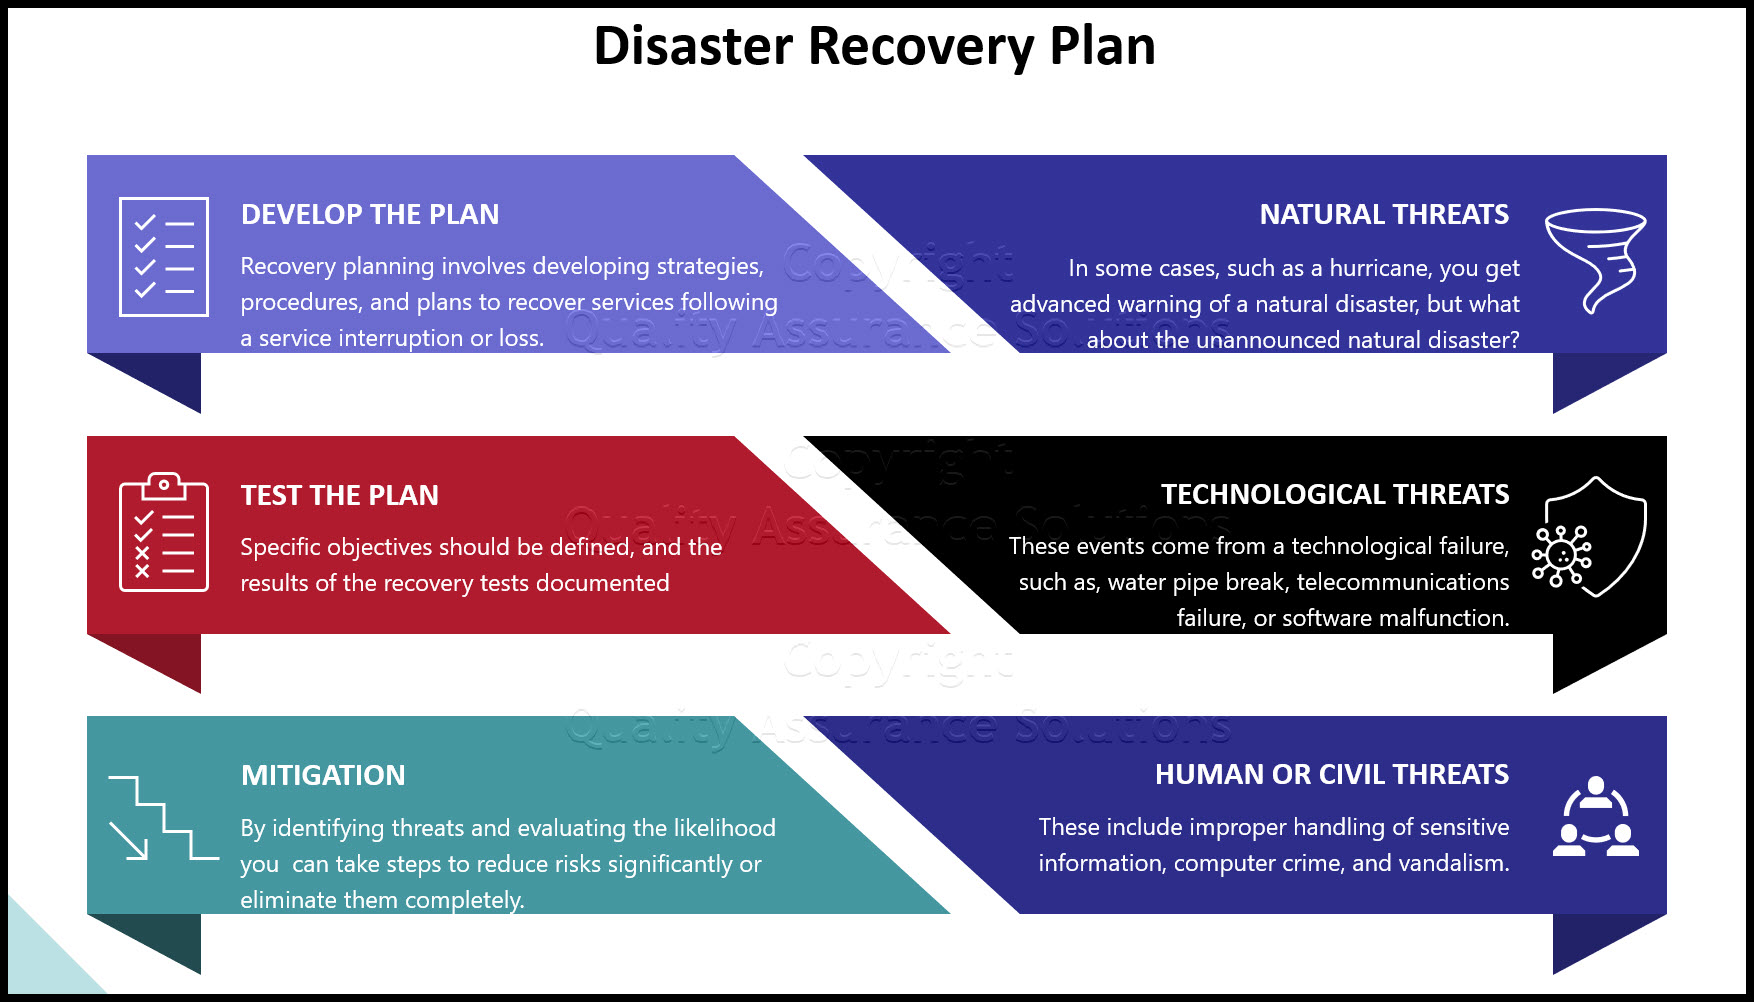 This disaster recovery article discusses the aspects to creating a contigency plan which is critical to your quality maanagement system.